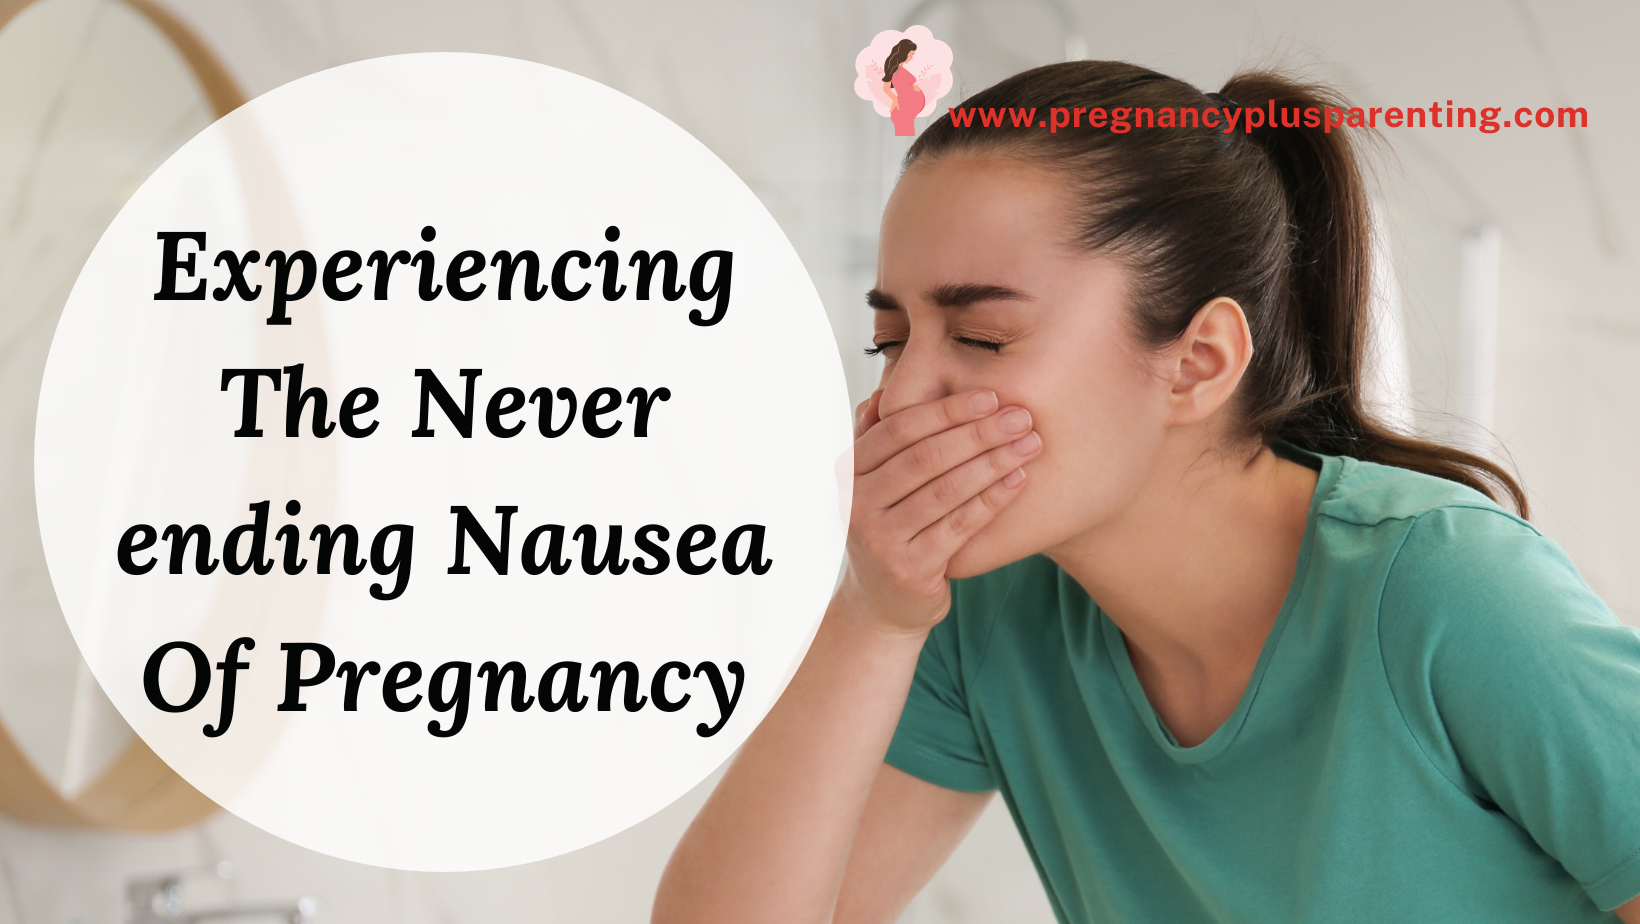 Experiencing The Never-ending Nausea Of Pregnancy